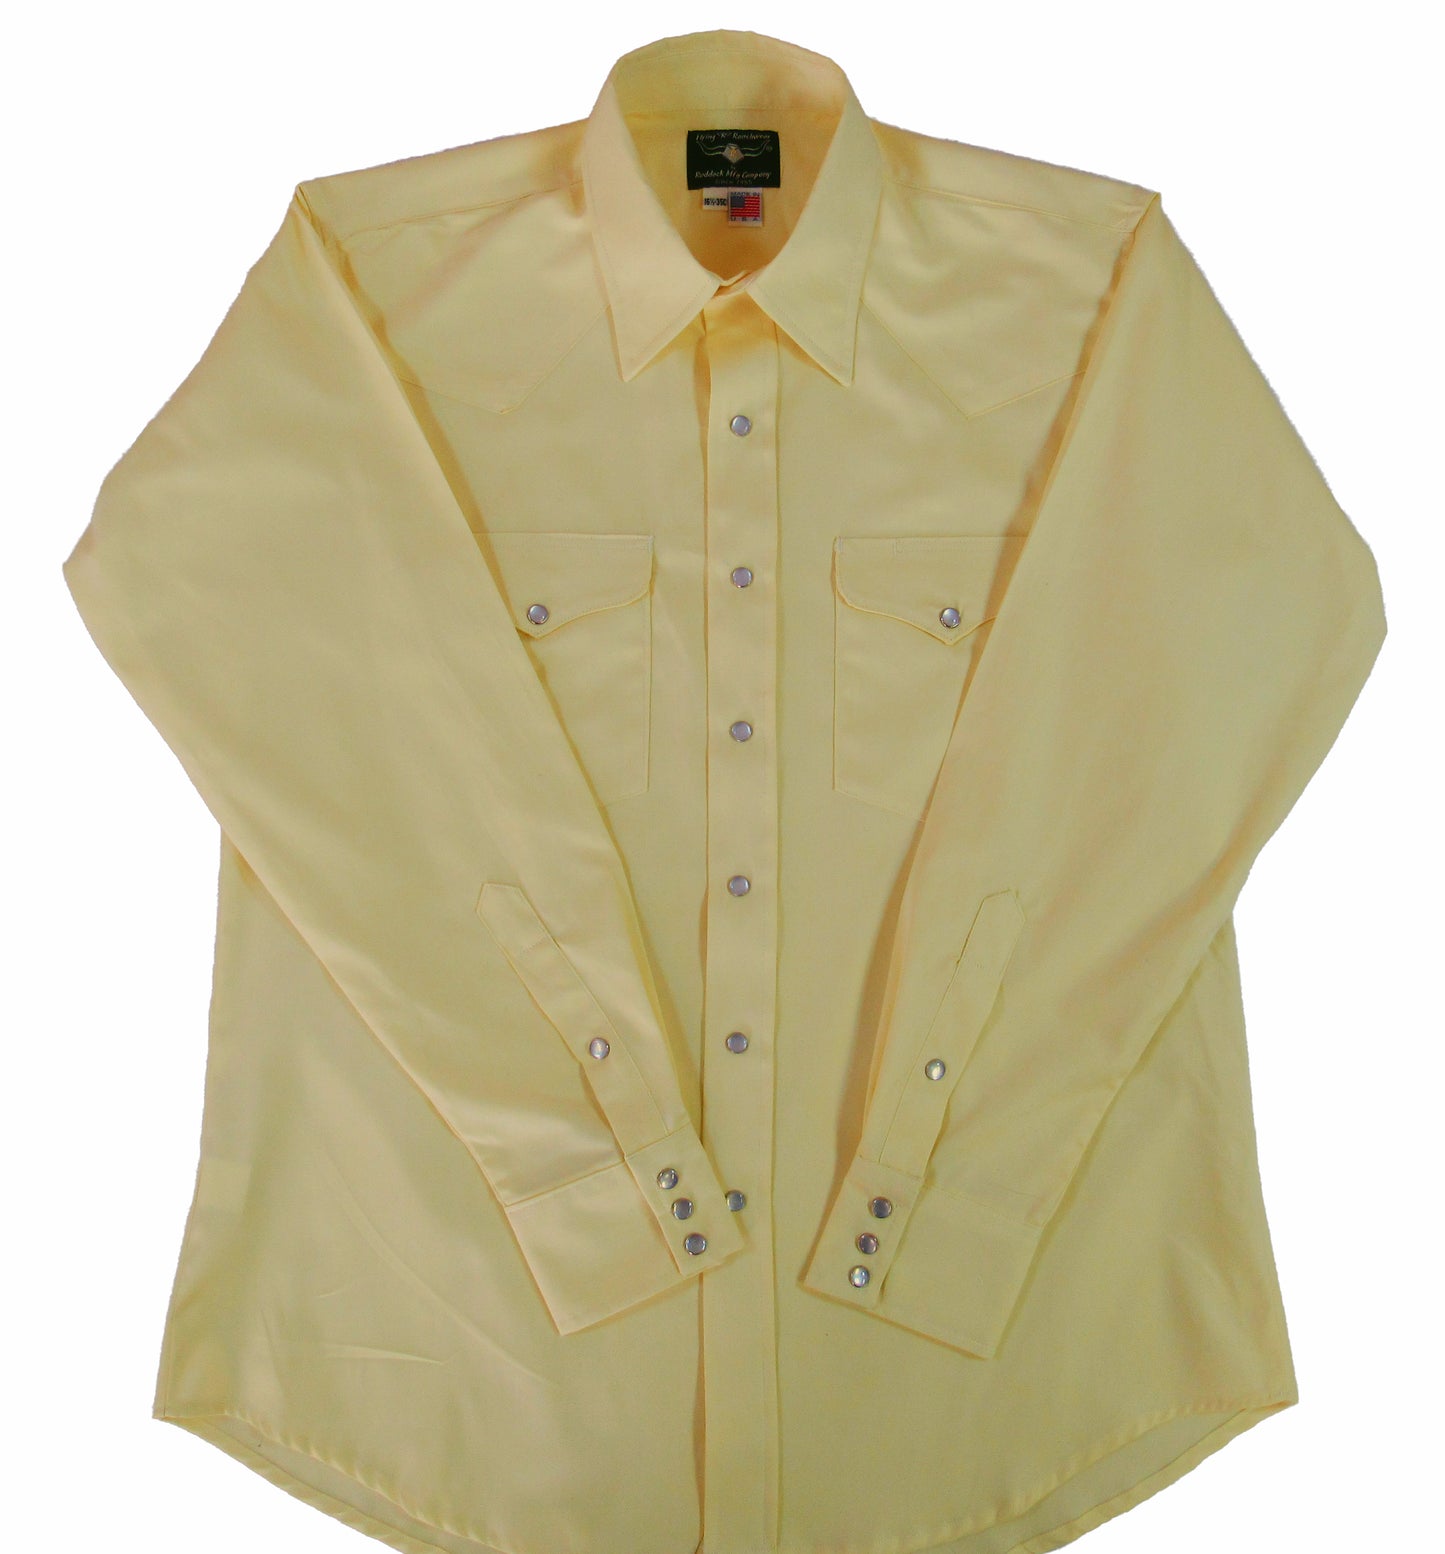 Flying R Ranchwear - Primo Pinpoint Oxford - Canary Yellow - Long Sleeve